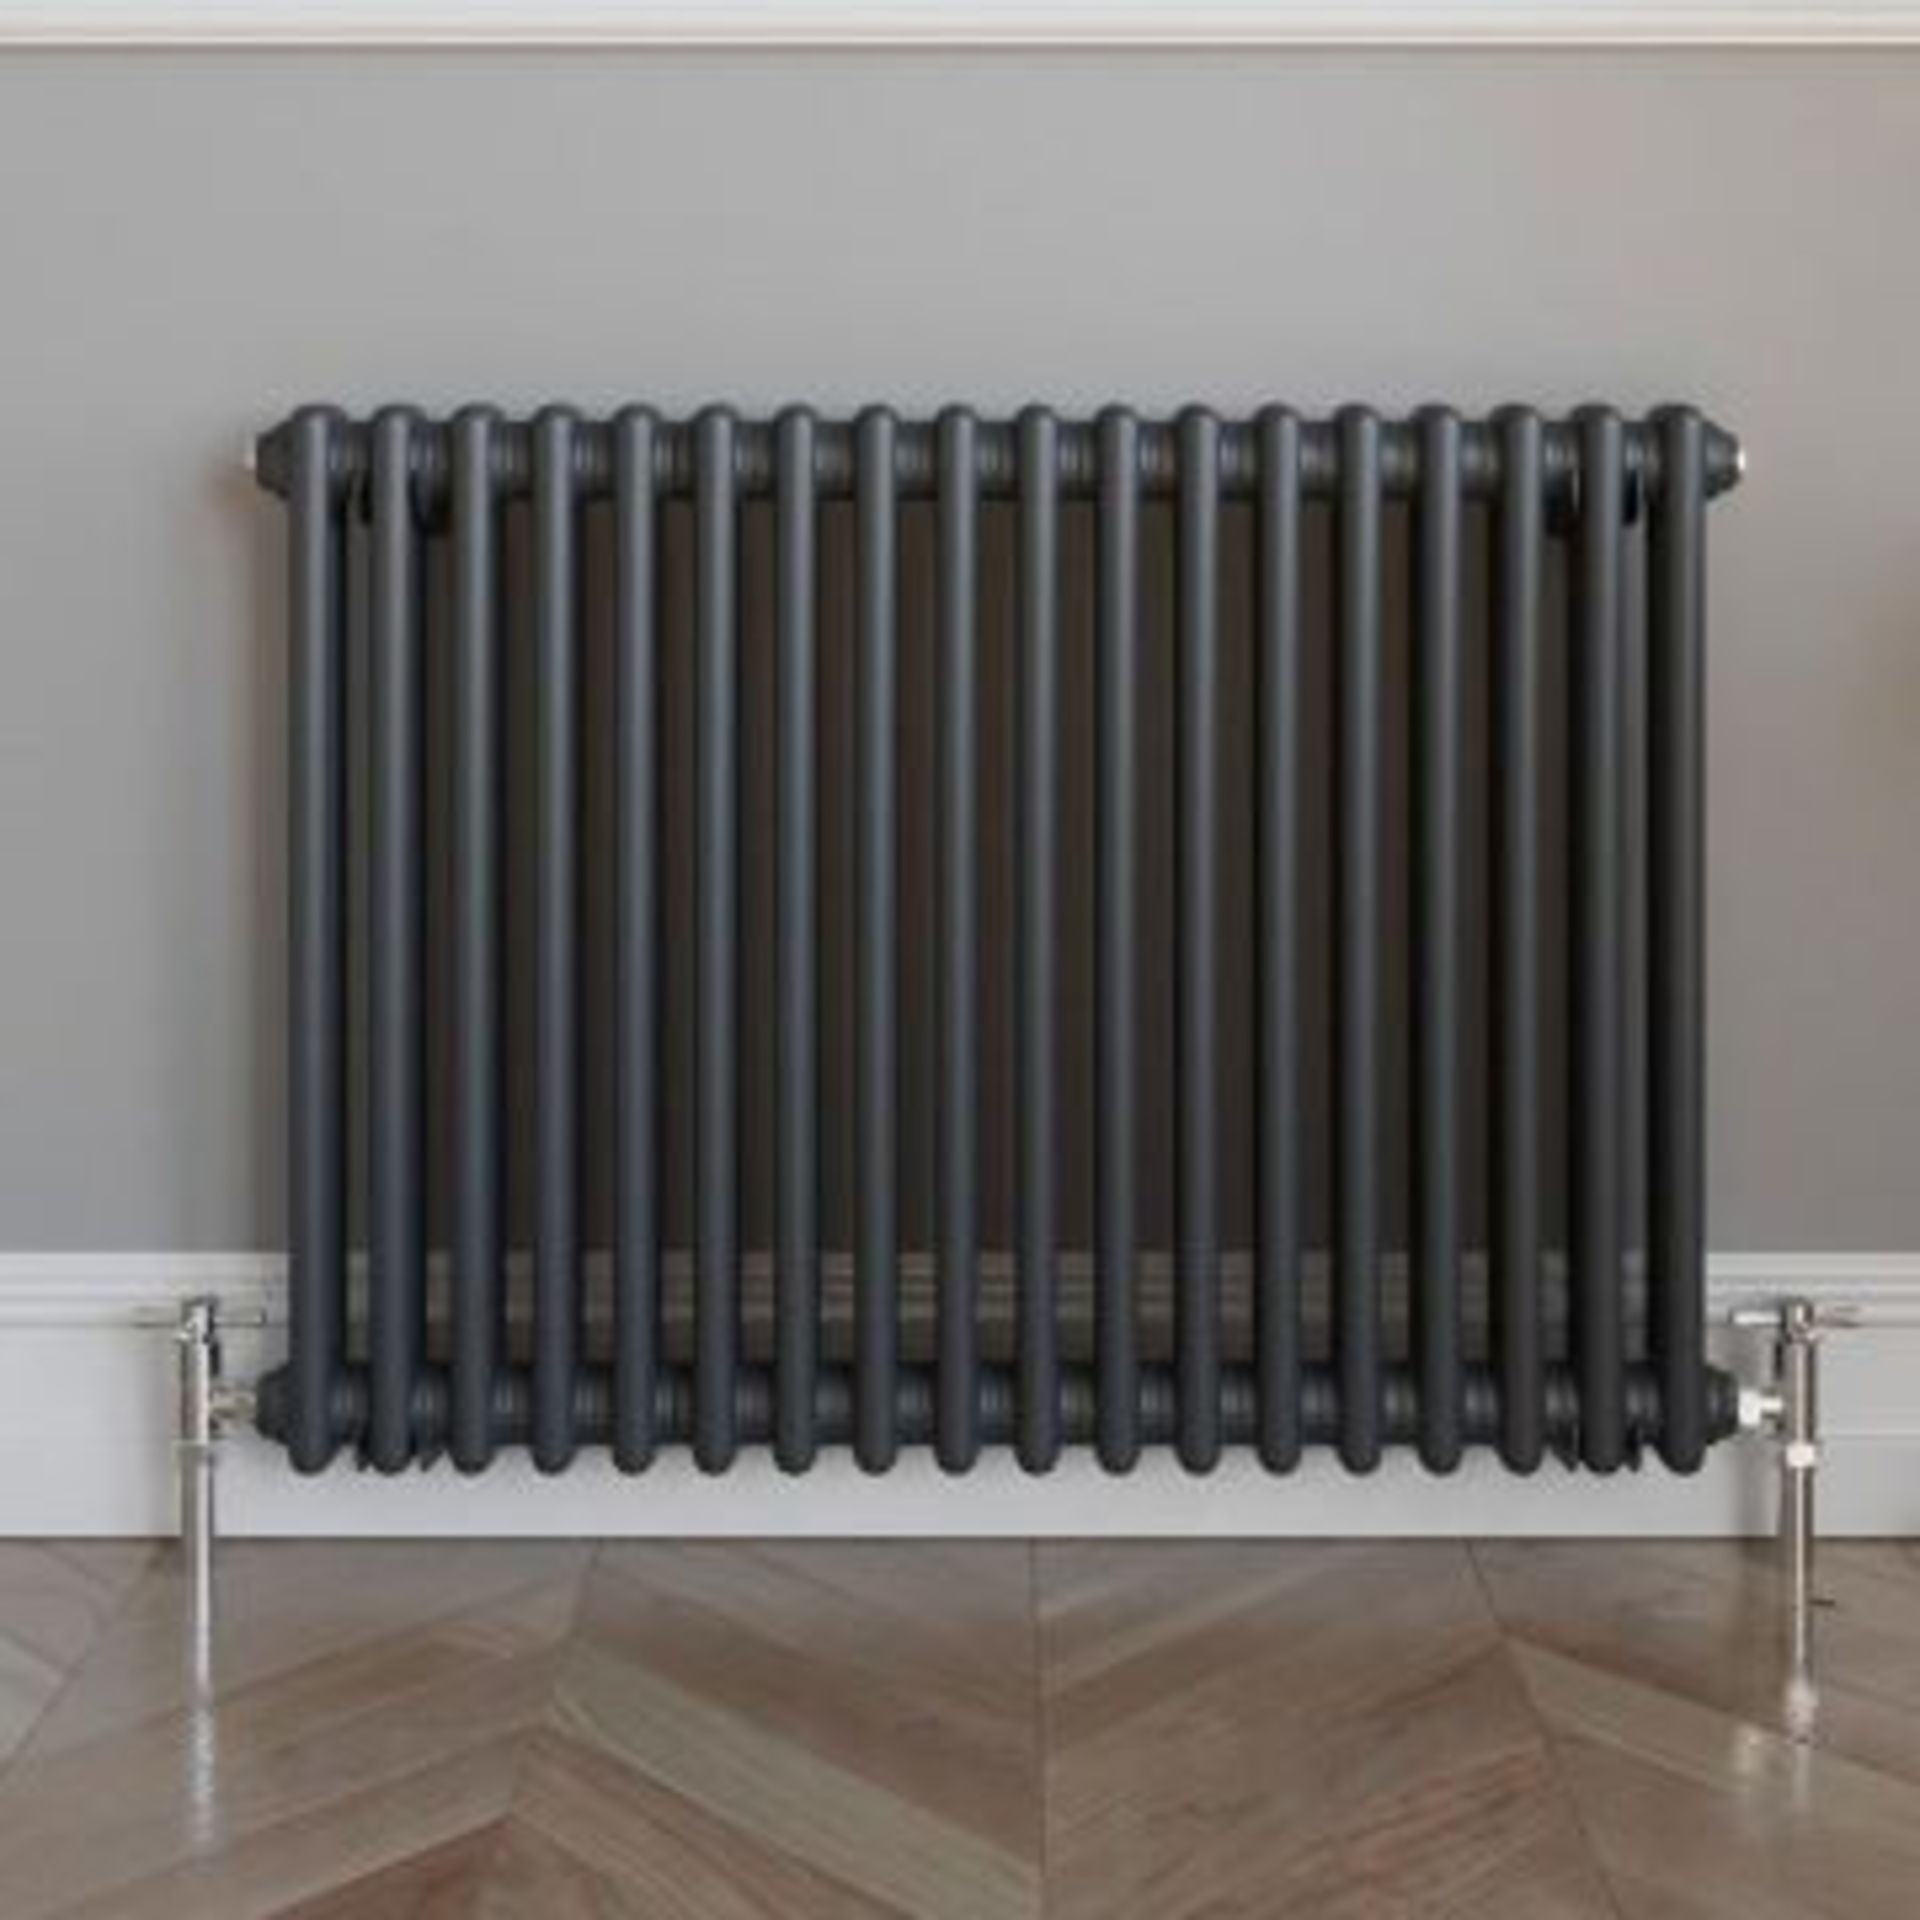 New & Boxed 600x828mm Anthracite Double Panel Horizontal Colosseum Traditional Radiator.RCA563. - Image 2 of 2